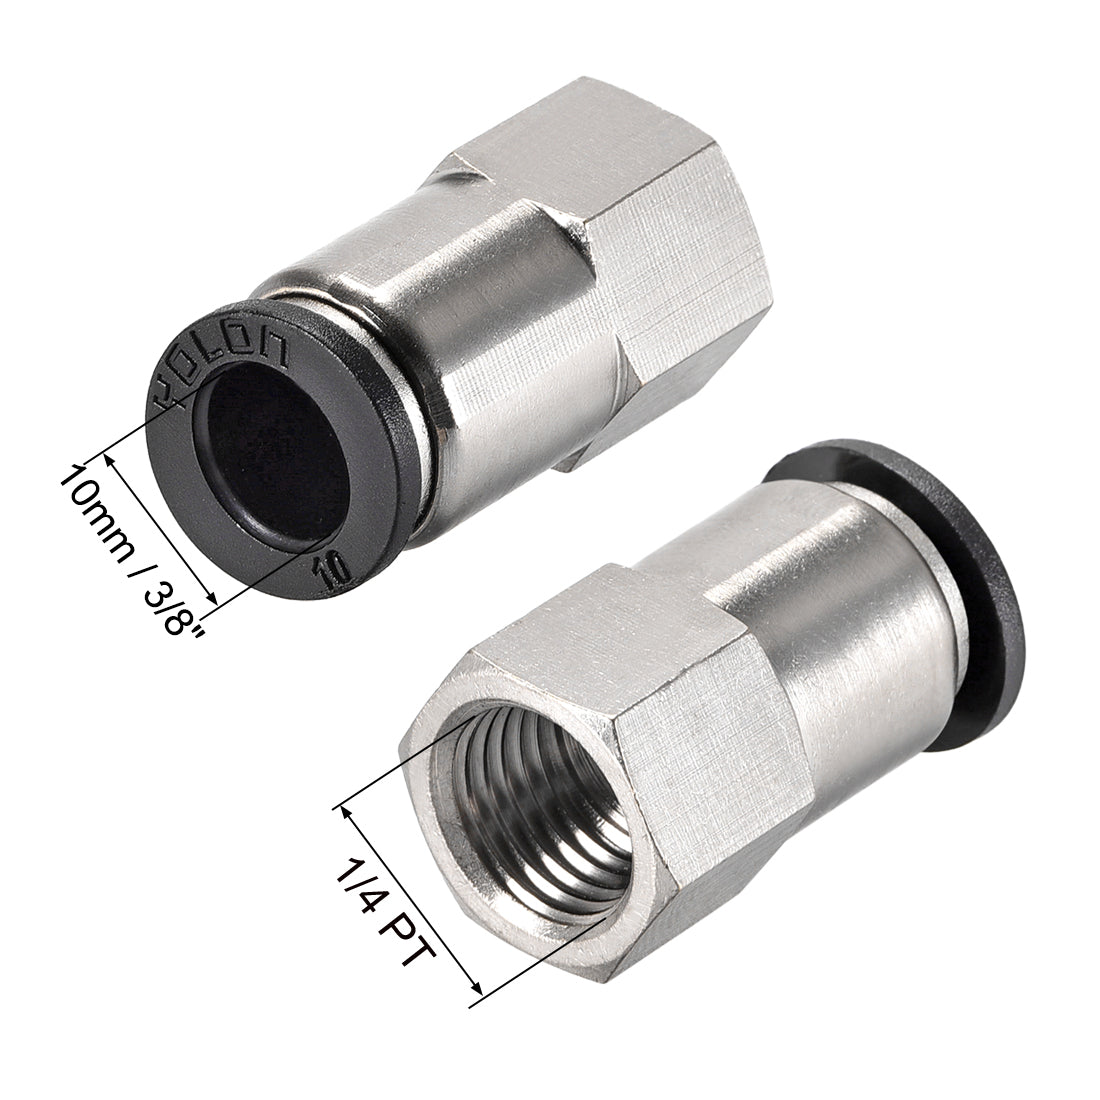 uxcell Uxcell Push to Connect Tube Fitting Adapter 10mm Tube OD x 1/4 PT Female Straight Pneumatic Connecter Pipe Fitting